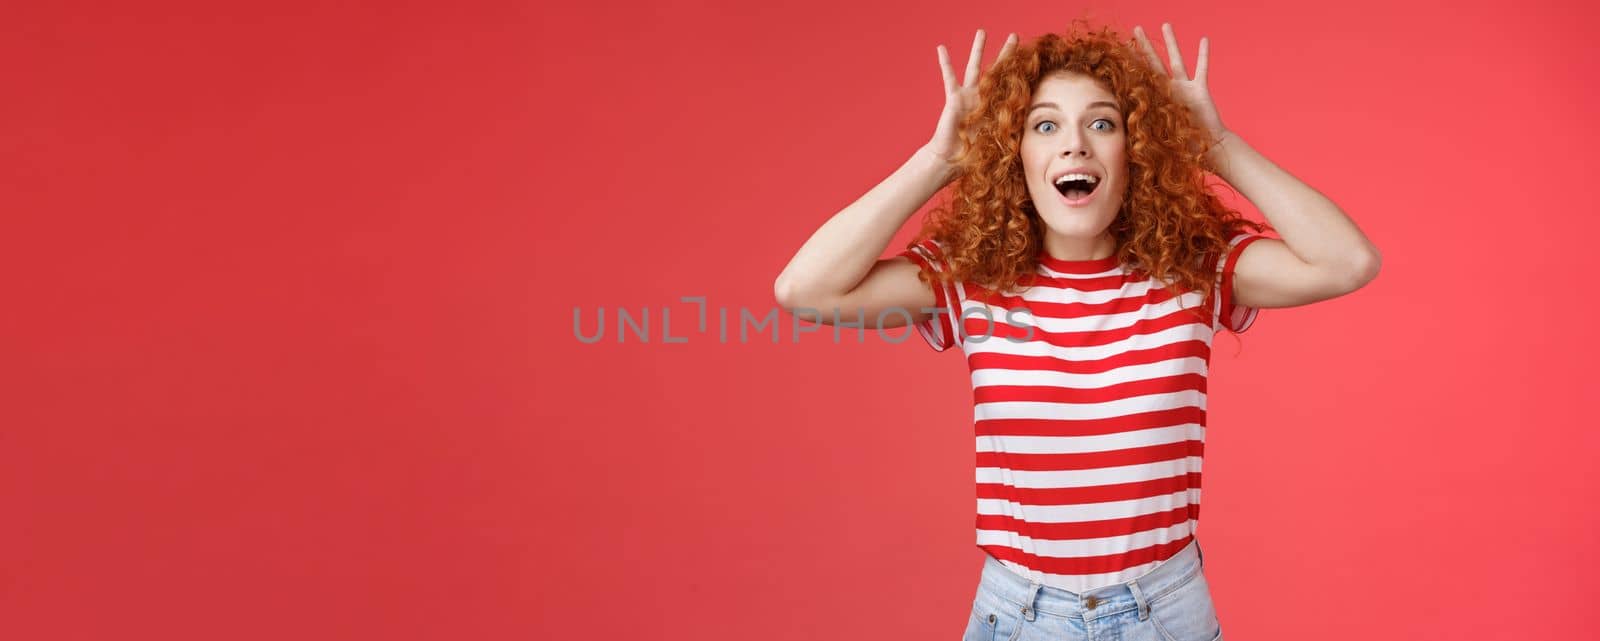 Lifestyle. Impressed excited shocked young cute redhead curly-haired ginger girlfriend reacting amazed surprised awesome gift cannot believe own eyes grab head thrilled open mouth ambushed red background.